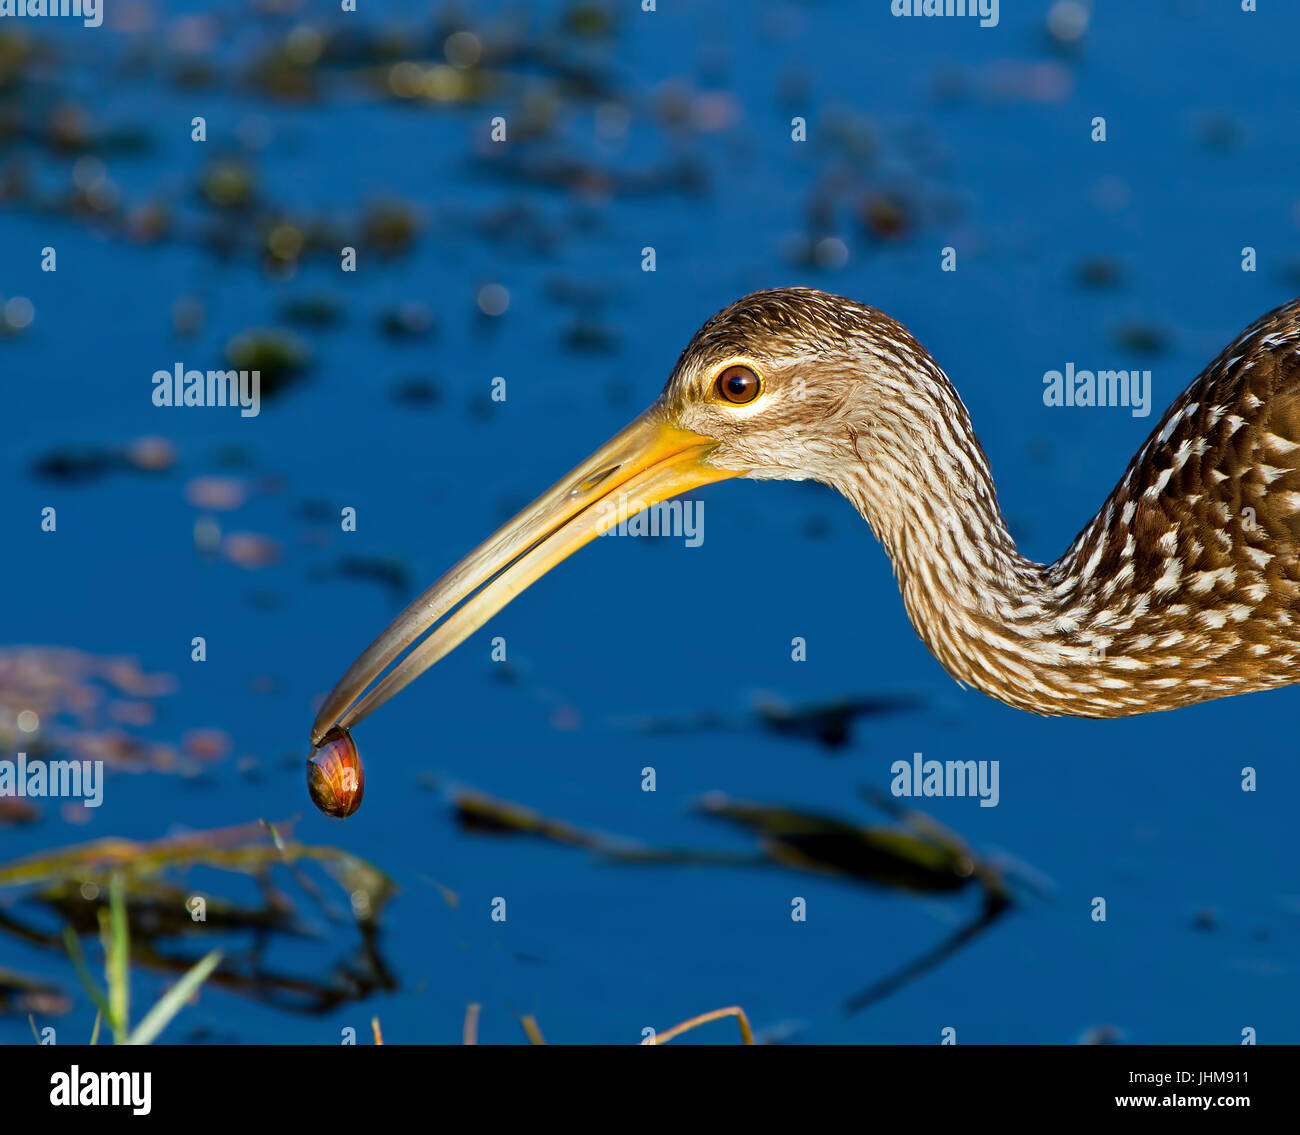 A Limpkin Feeds By The Water In The Florida Everglades The Limpkin